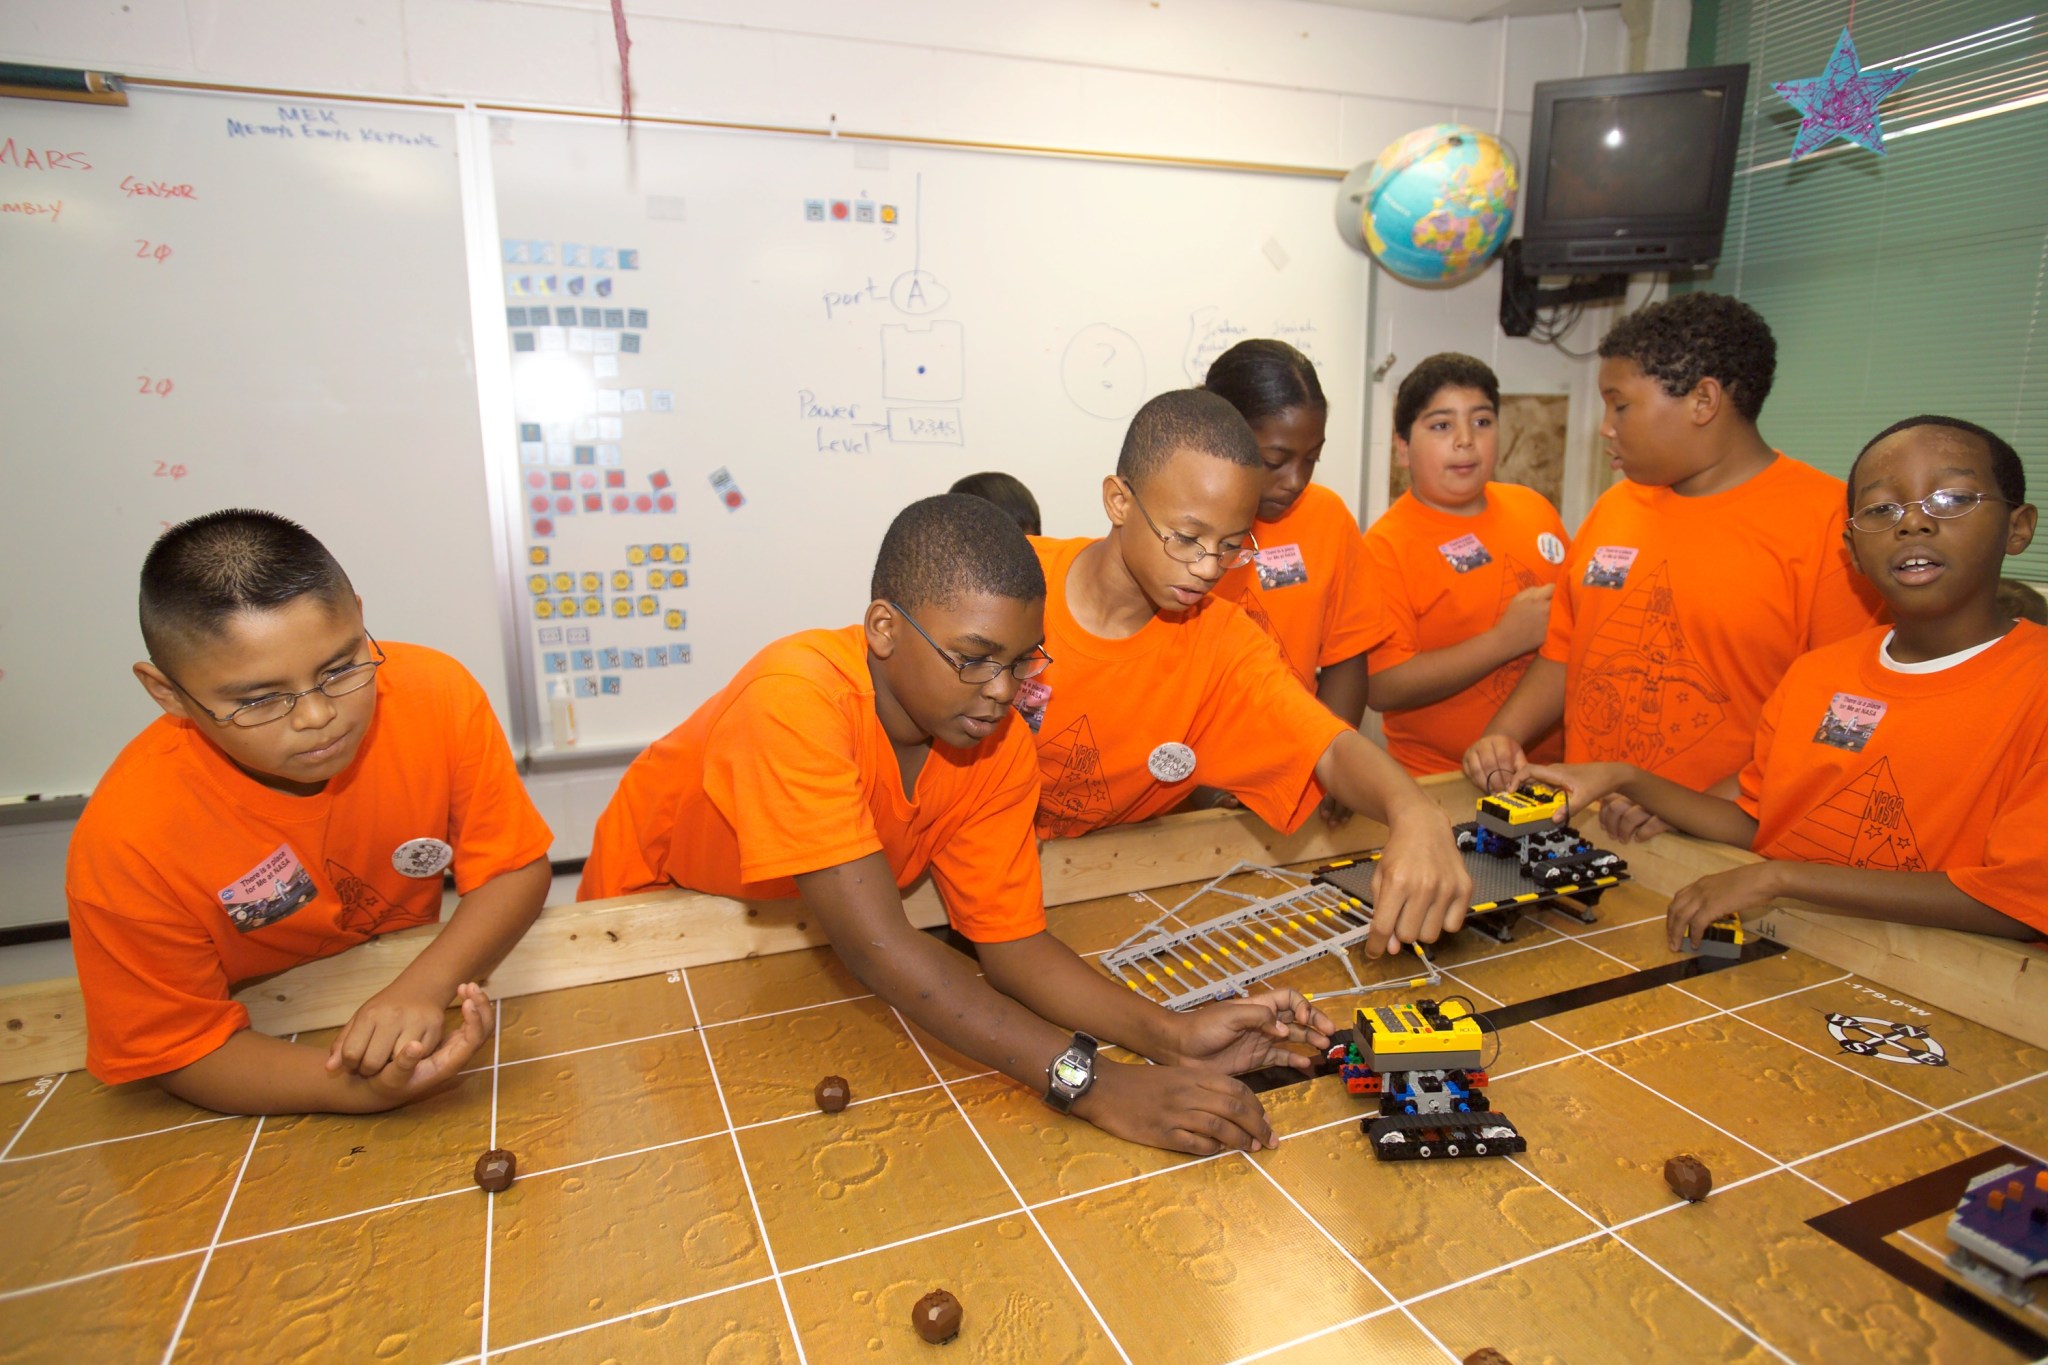 A group of students working on a mars robotics activity